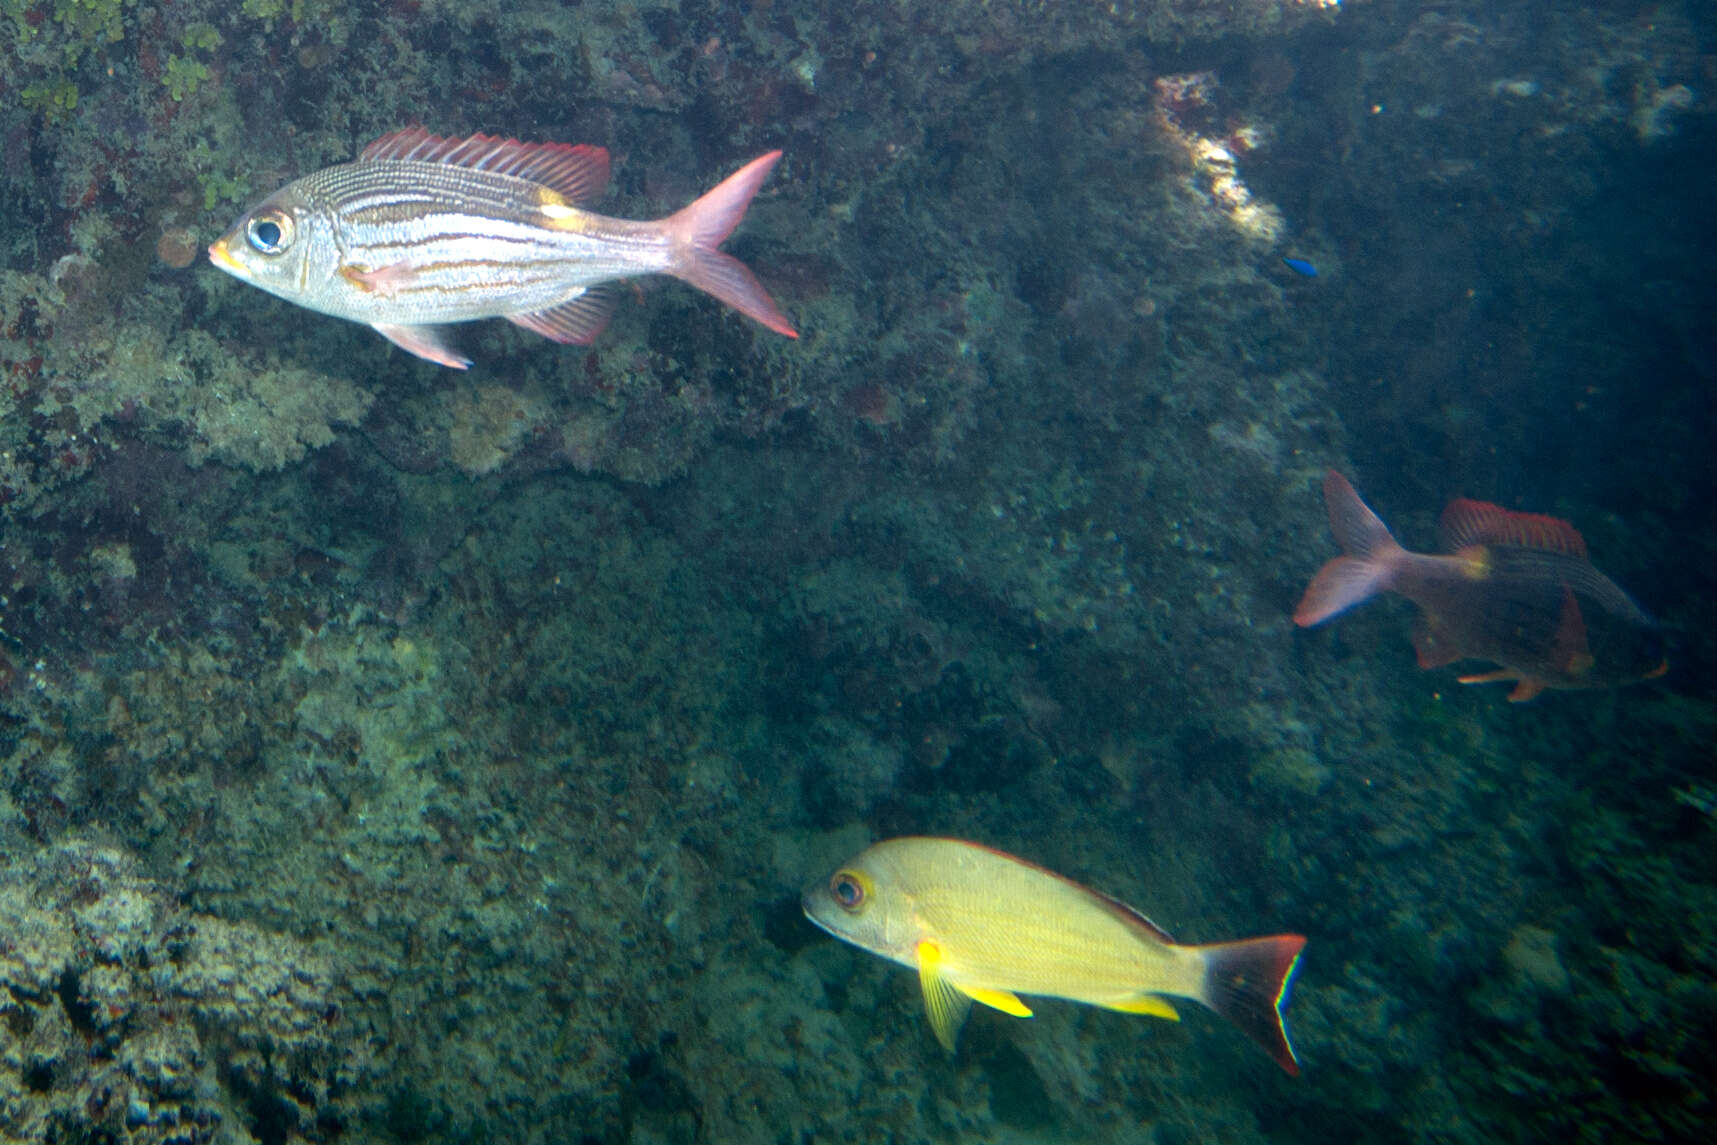 Image of Blacktail snapper